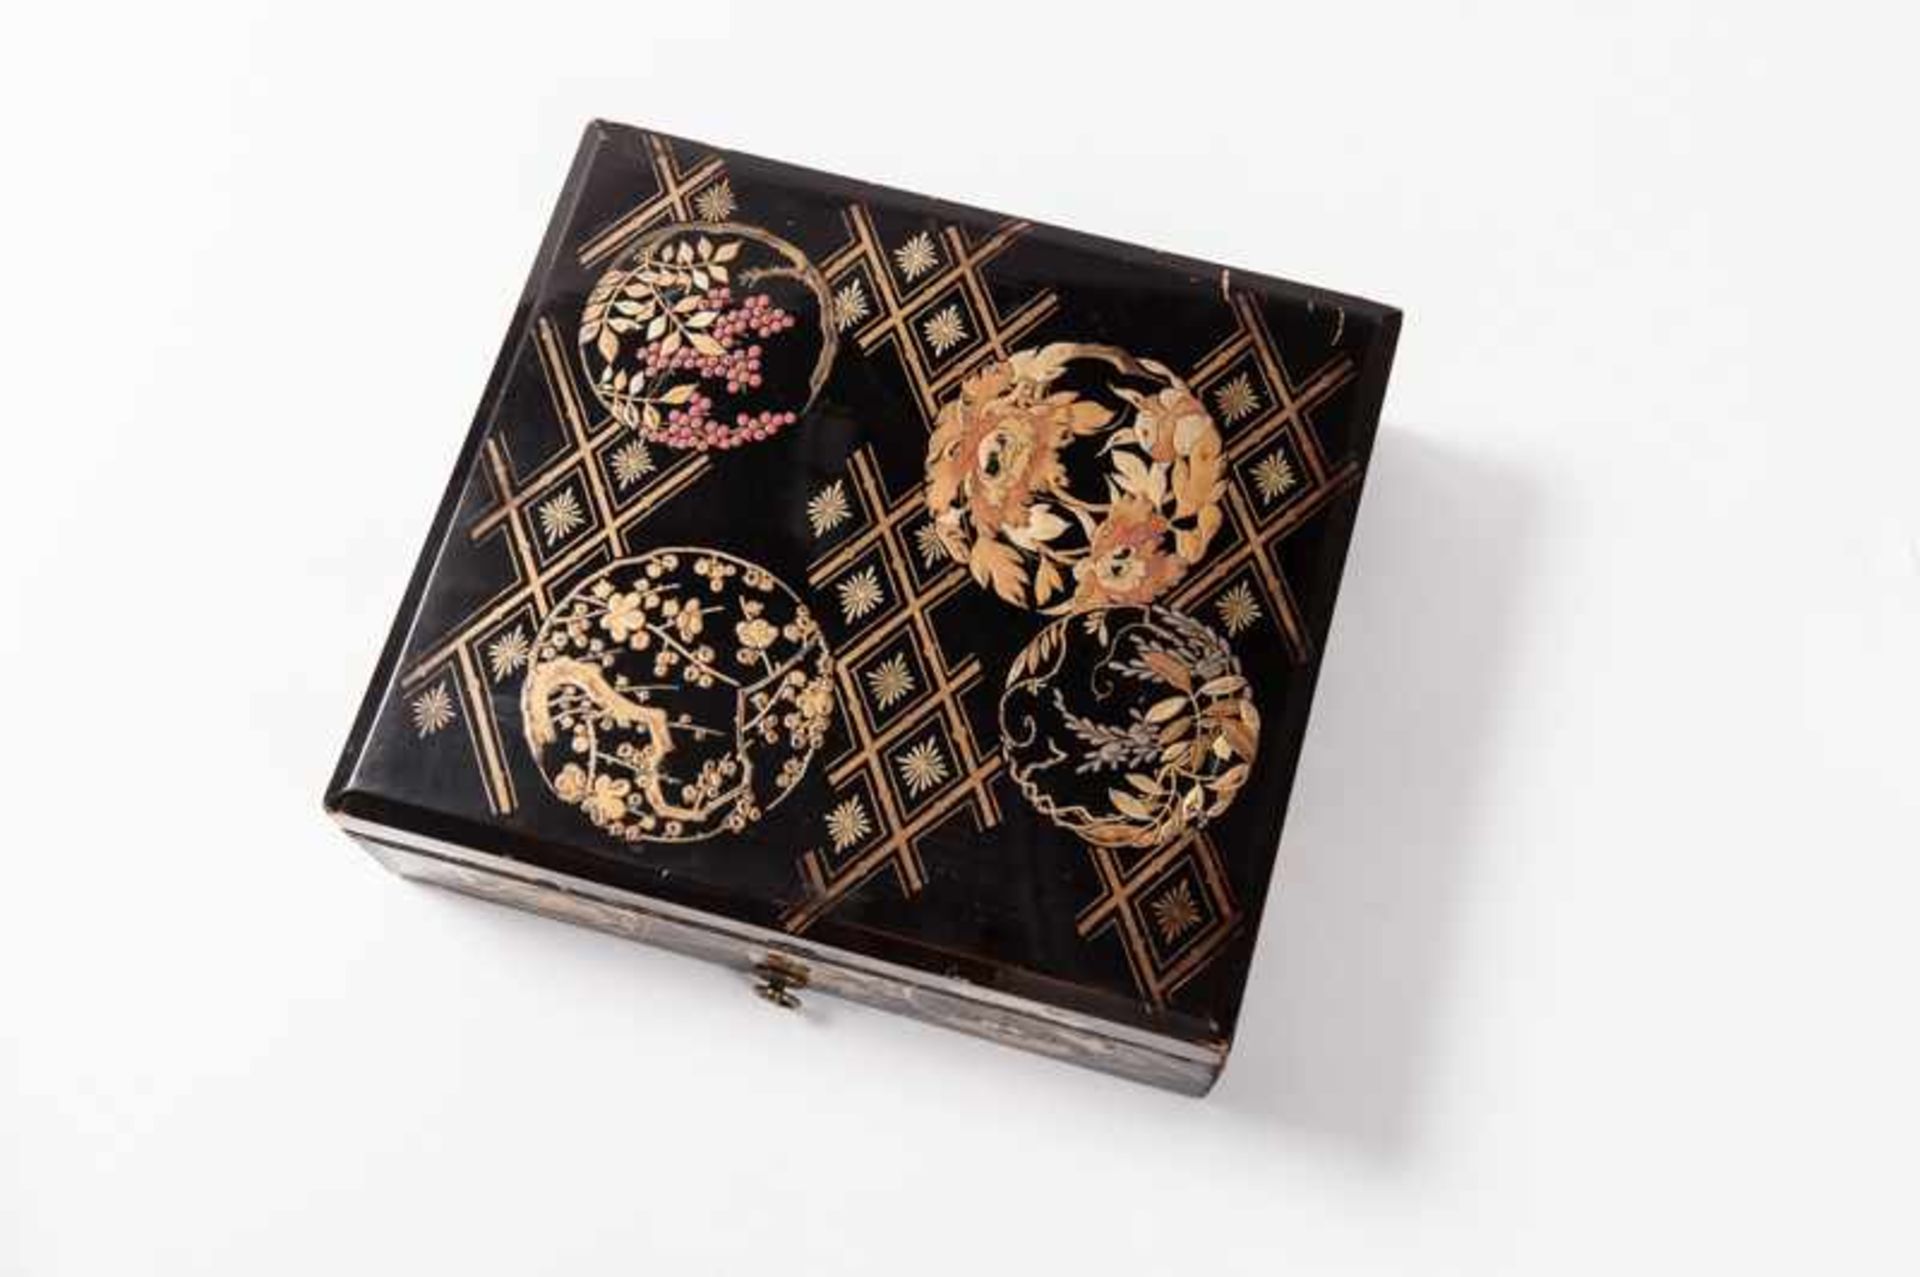 A LARGE DECORATIVE URUSHI LACQUER BOX WITH GOLD Wood, urushi lacquer. Japan, 19th cent.Condition - Image 2 of 4